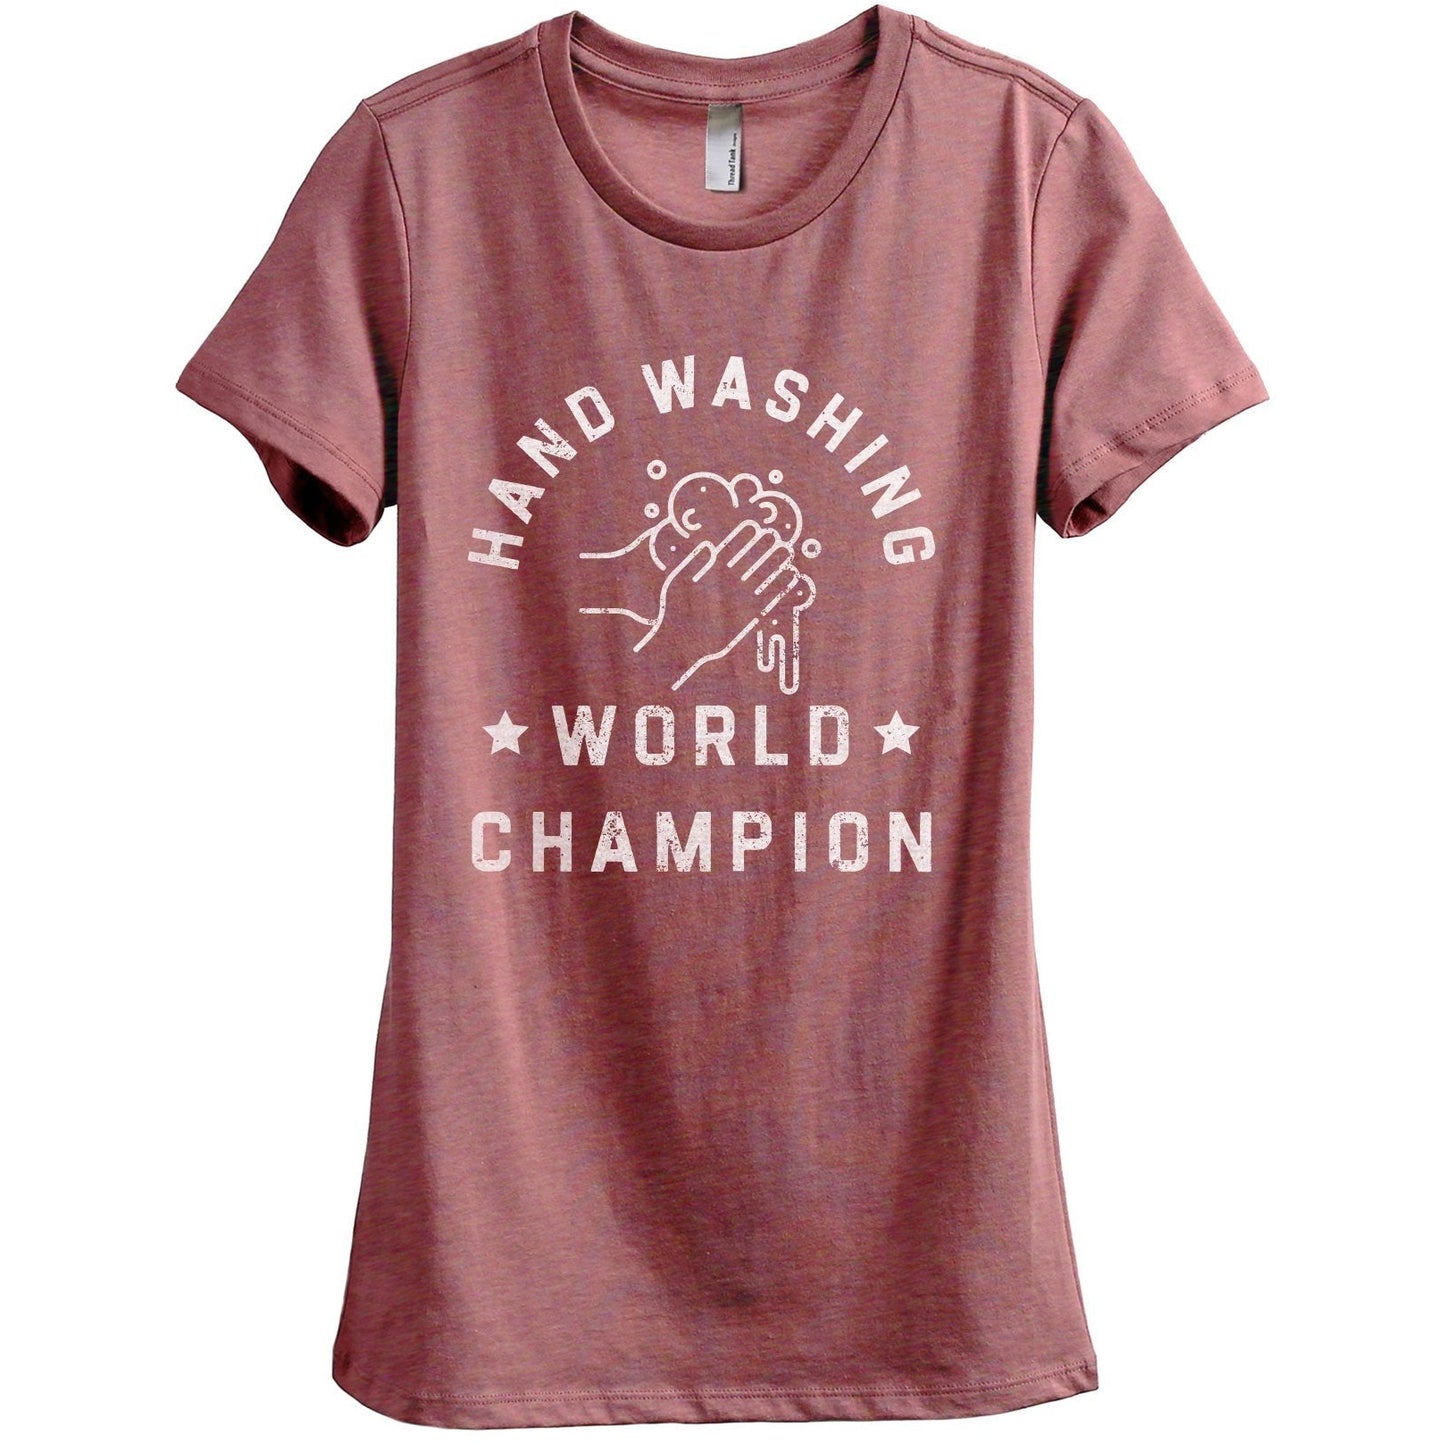 Hand Washing World Champion Women's Relaxed Crewneck T-Shirt Top Tee Heather Rouge